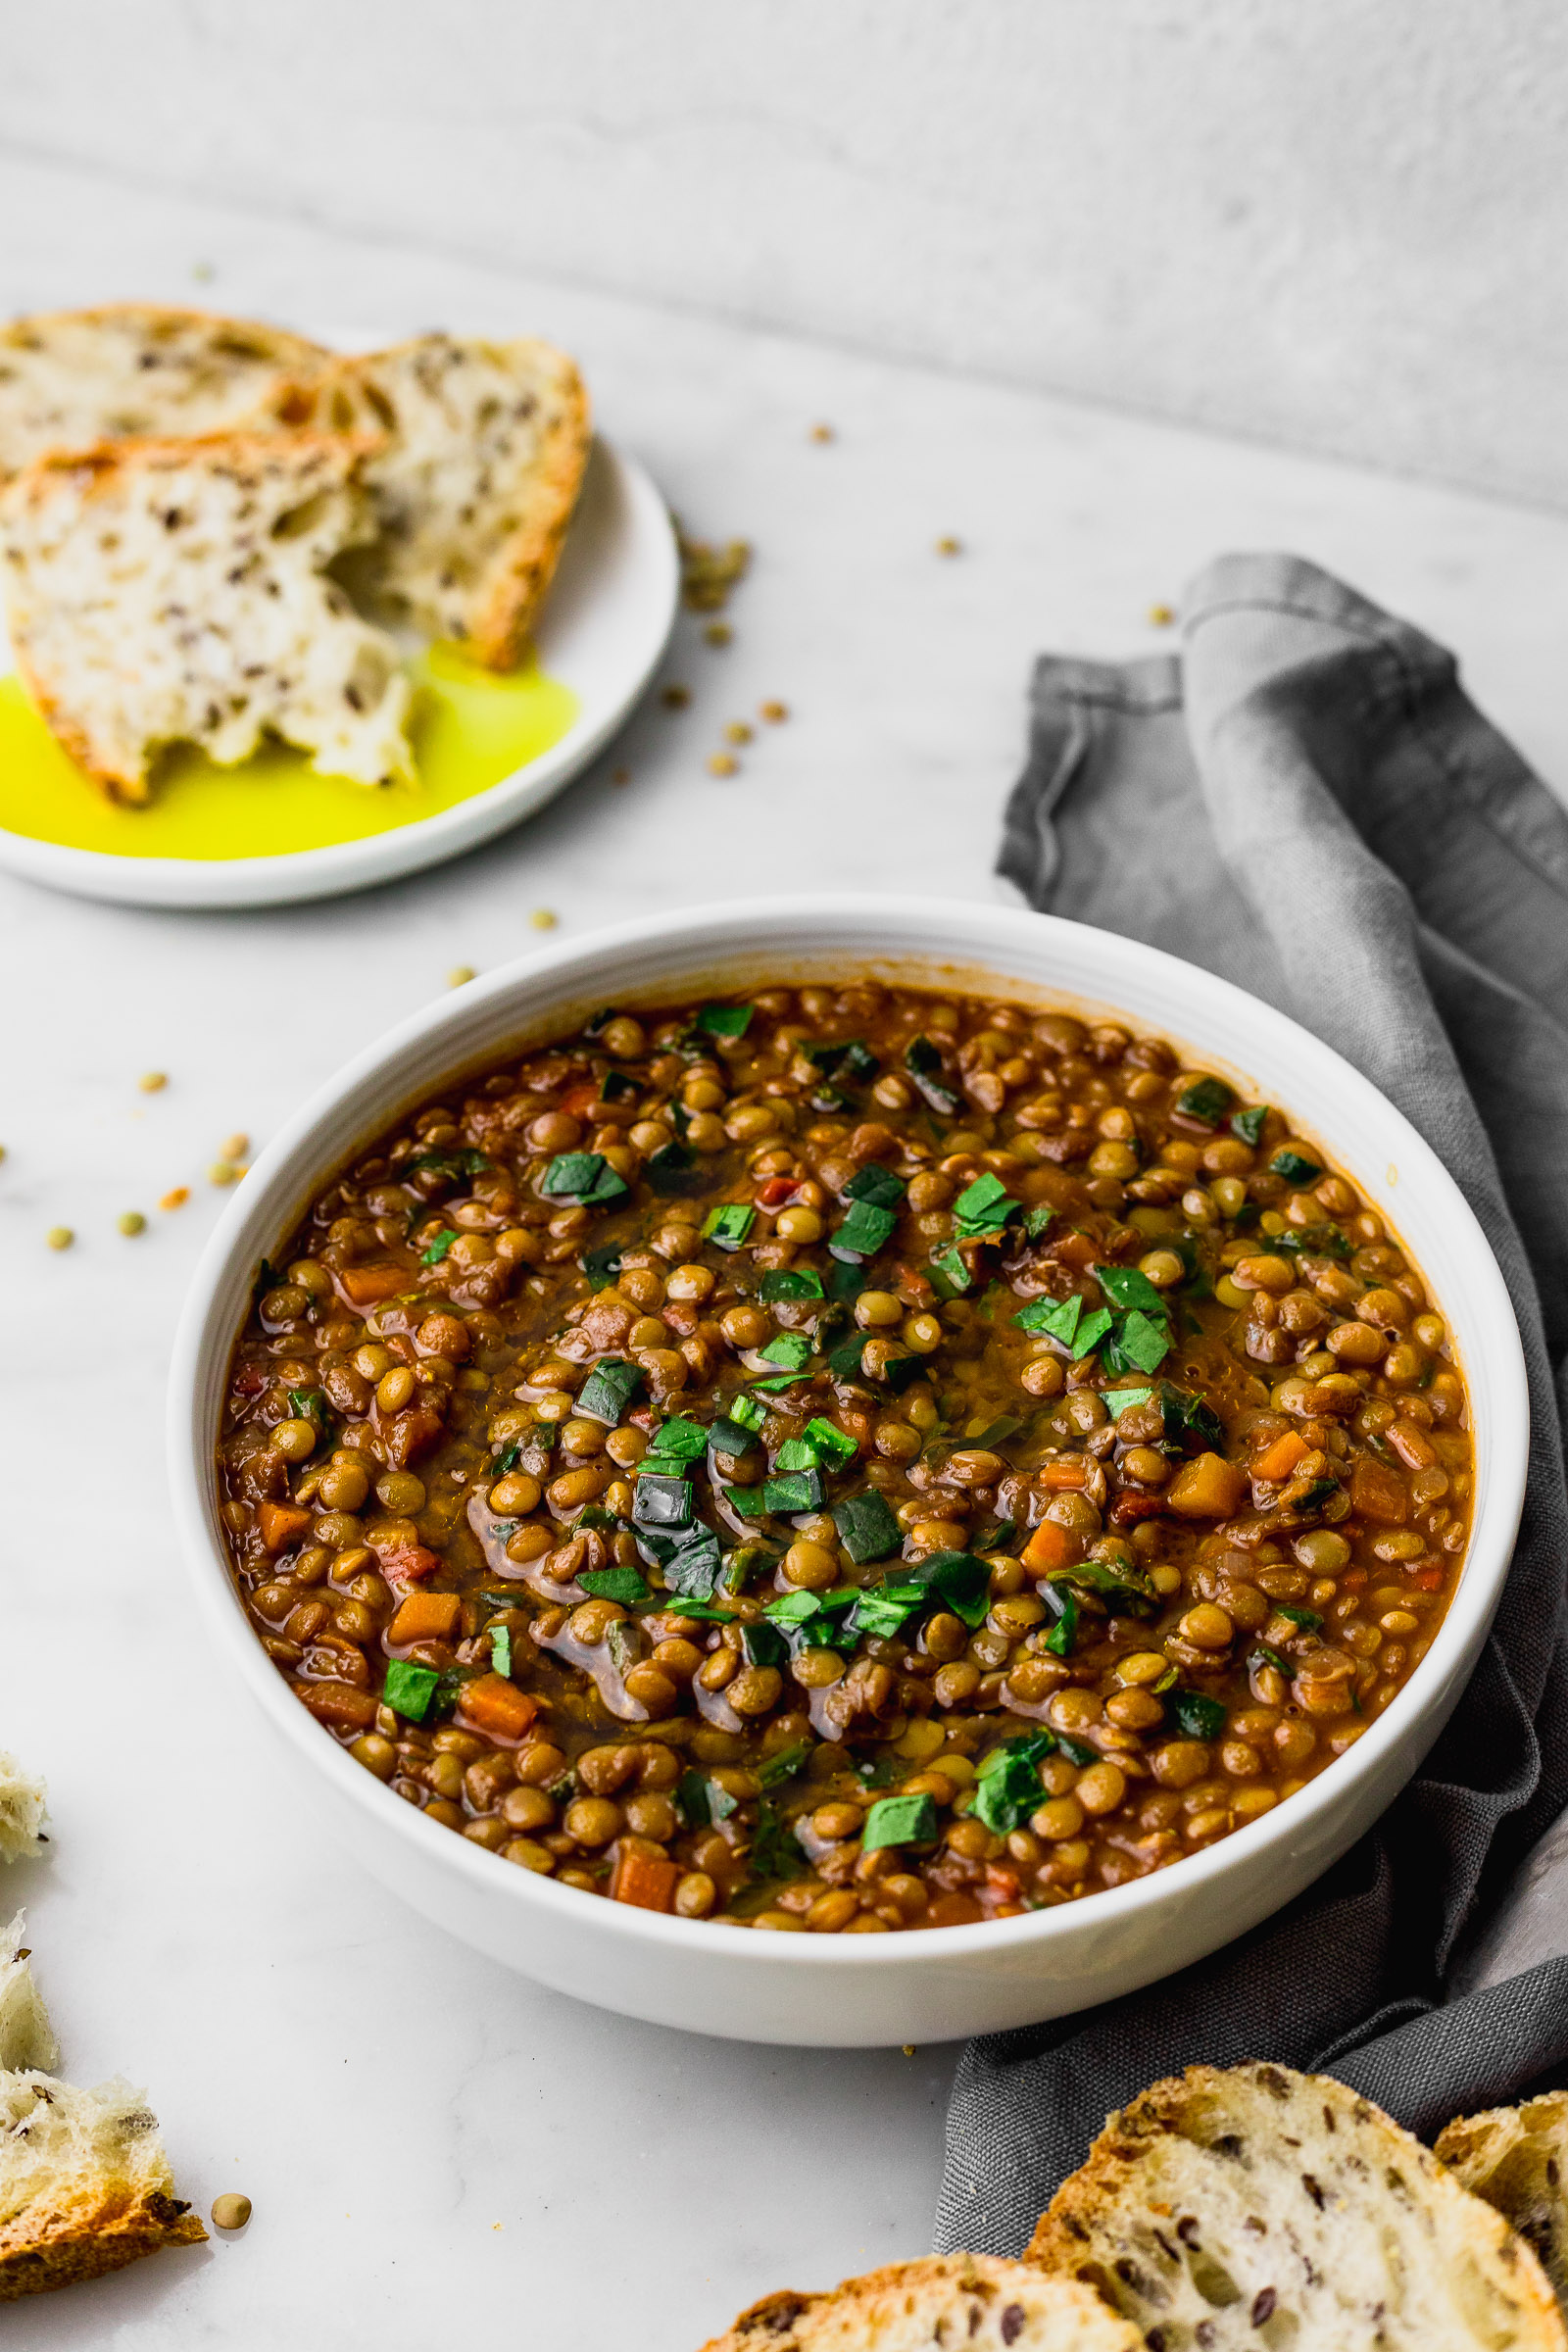 Brown lentils in a bowl, finished with olive oil and spinach. On the side, a small dish with olive oil and a slice of bread.